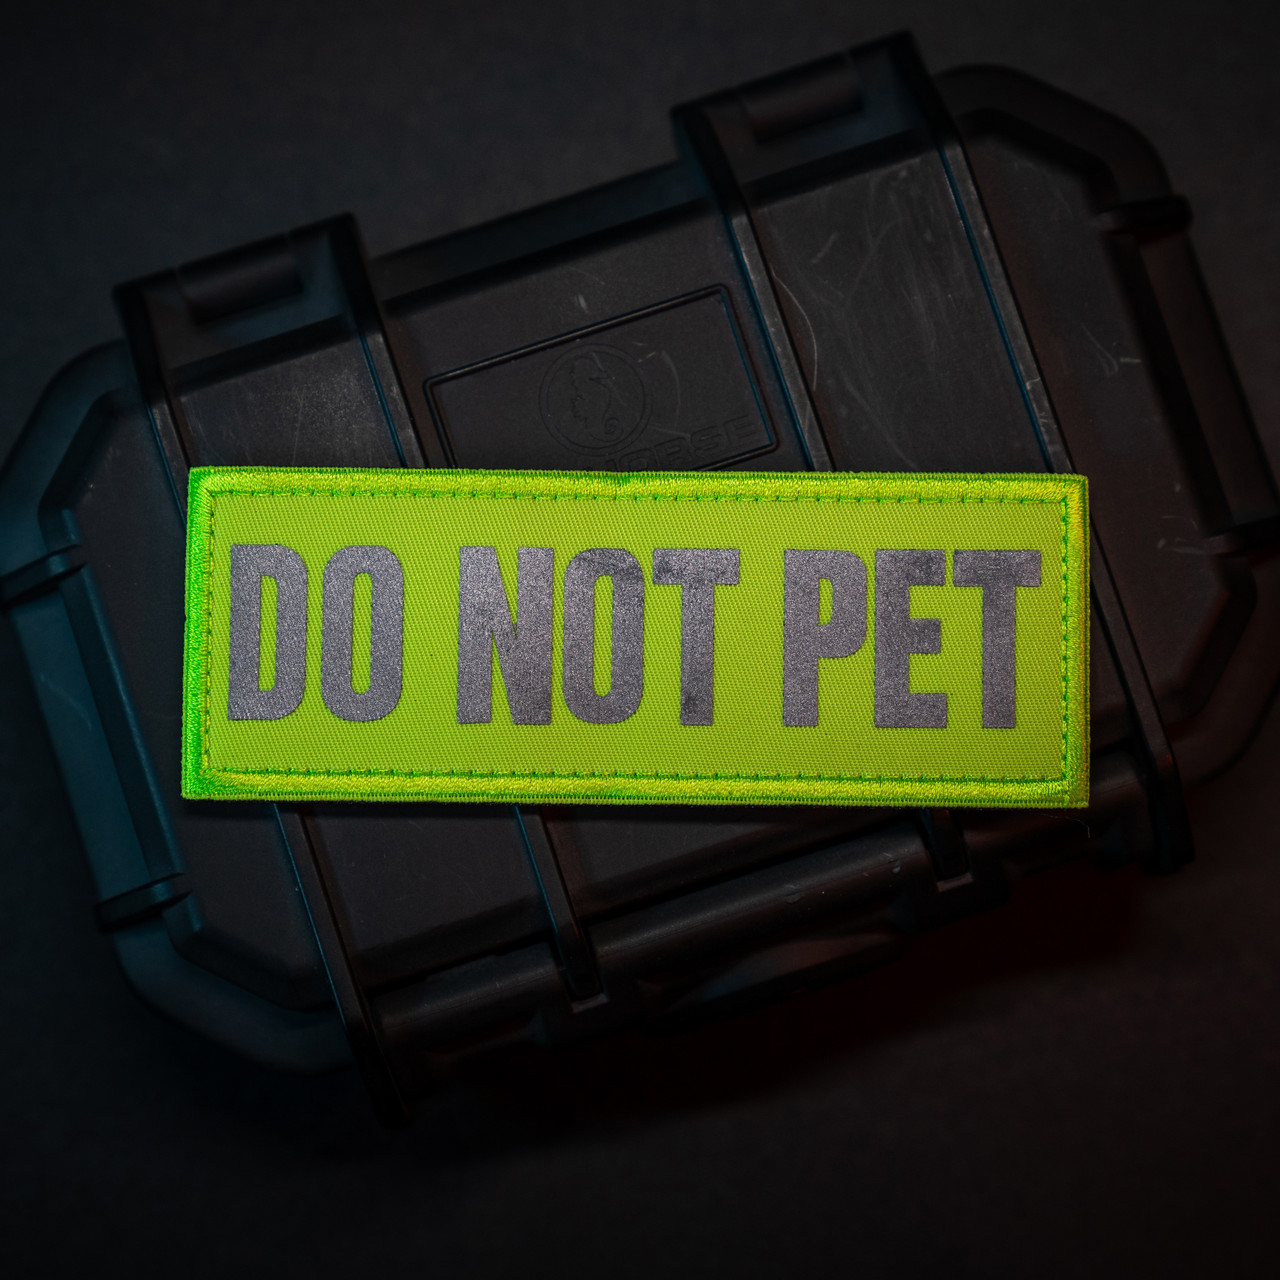 custom do not pet patch with